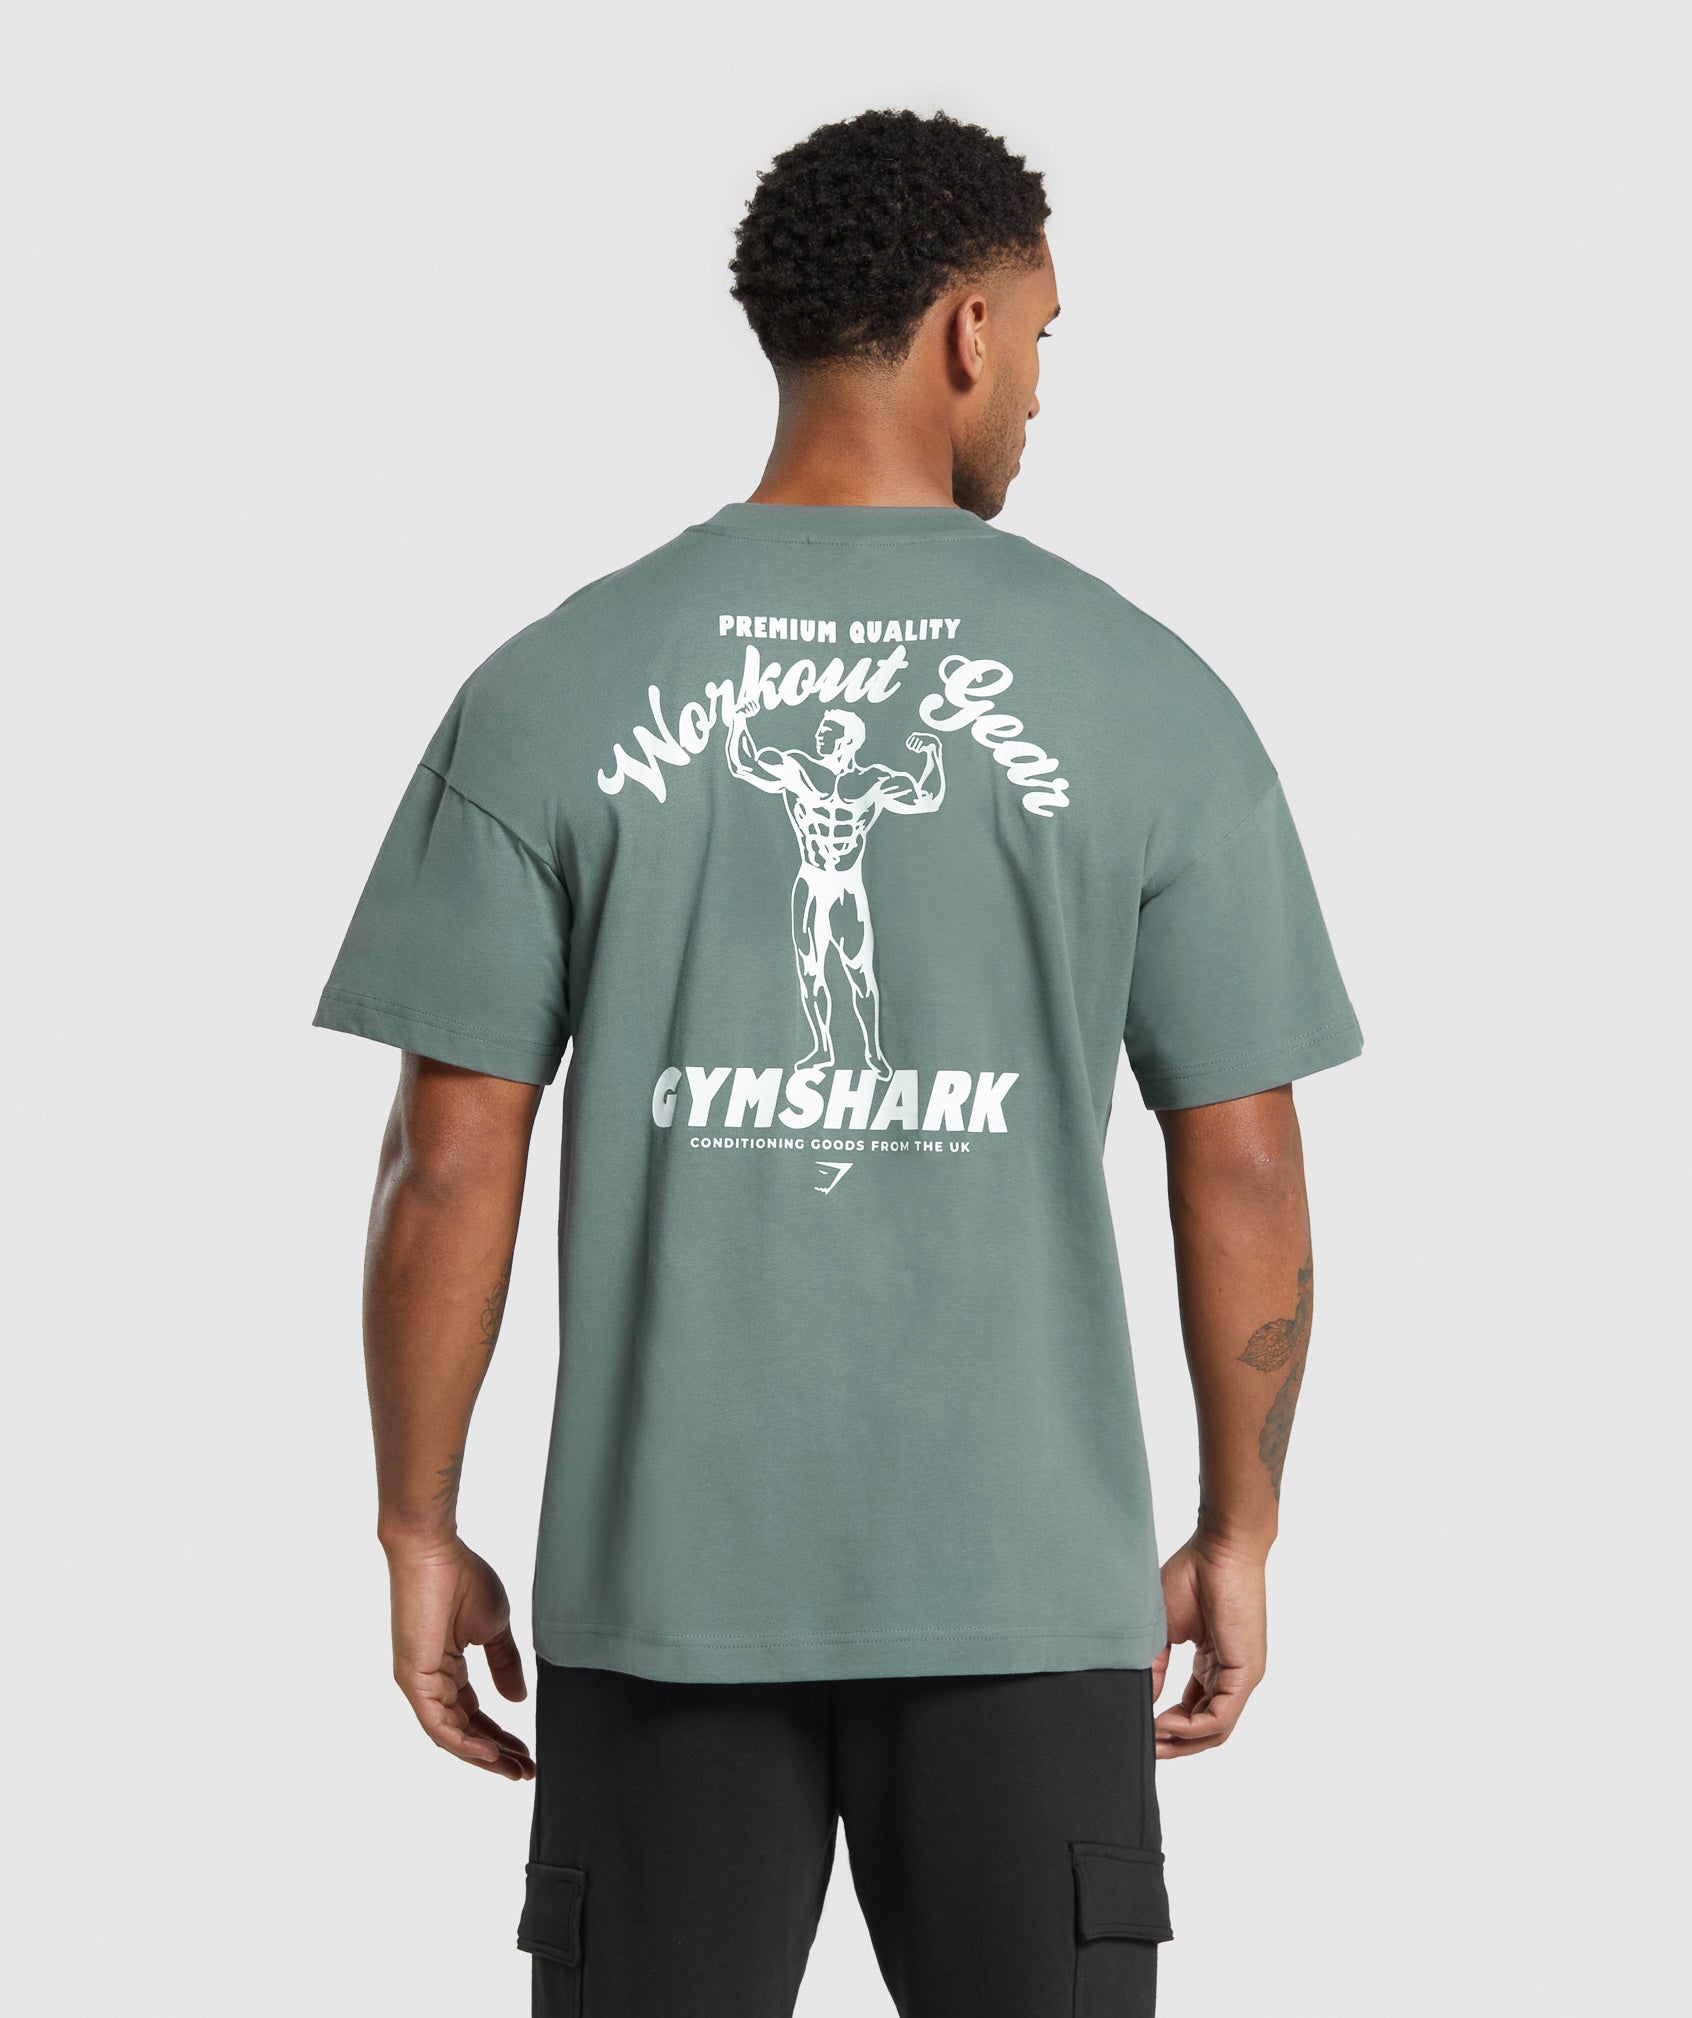 Workout Gear T-Shirt in Cargo Teal